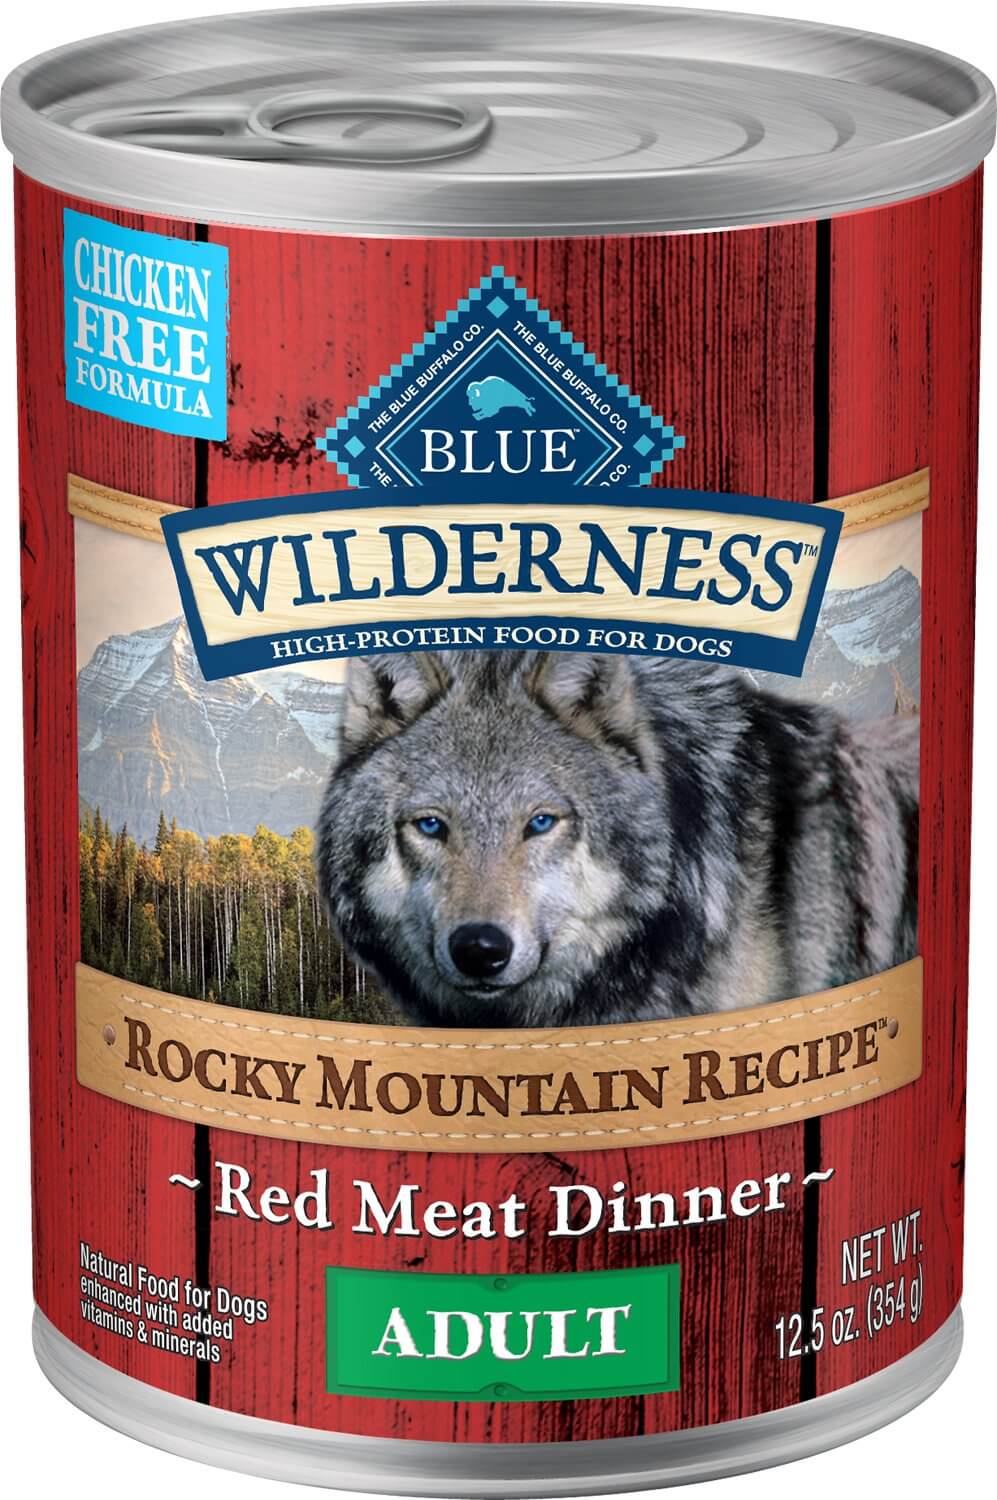 Blue Buffalo Wilderness Rocky Mountain Recipe Dog Food Review (Canned)